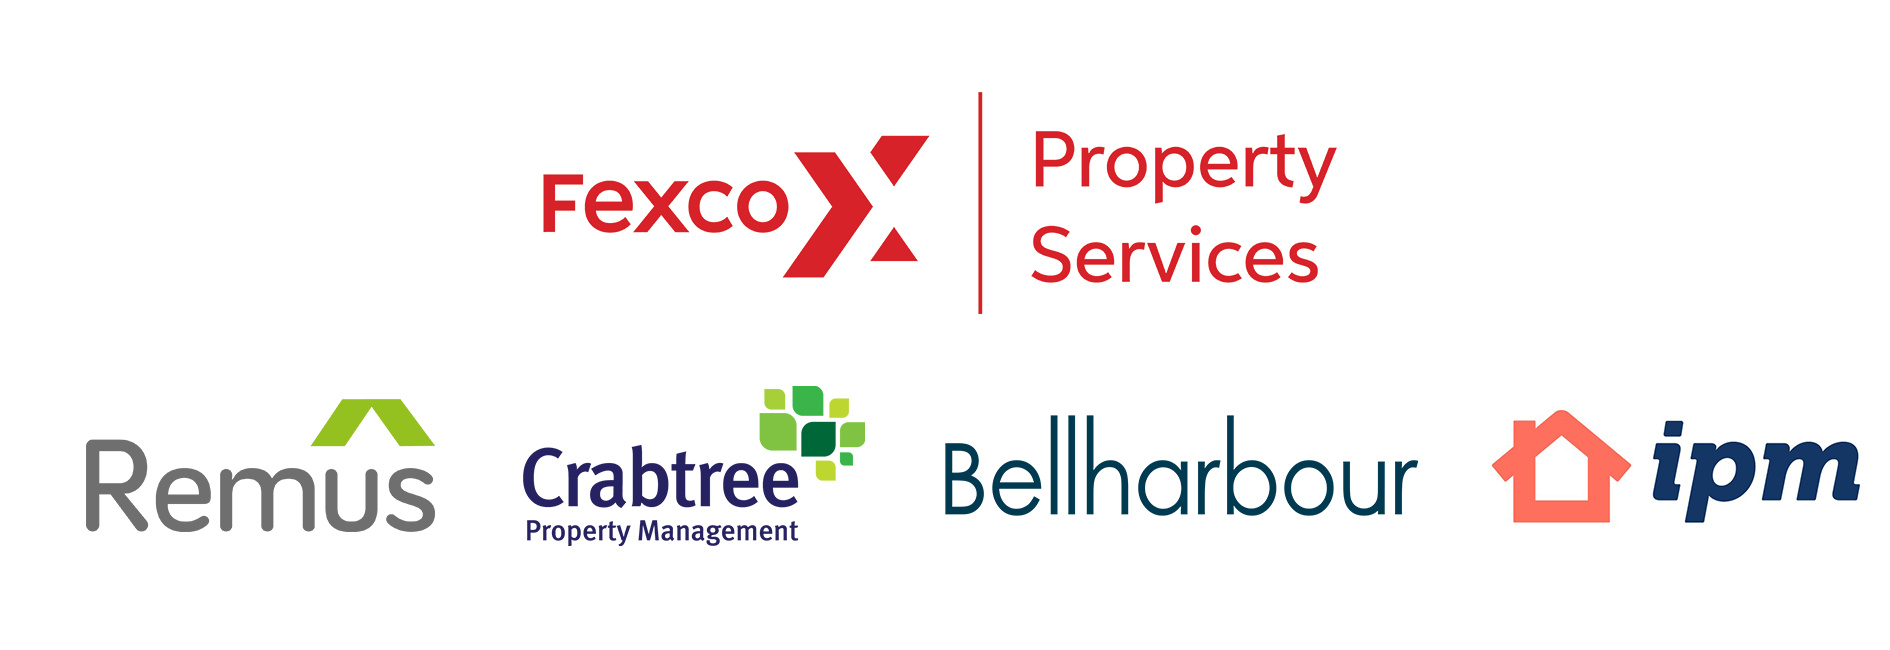 Job advertised by Fexco Property Services